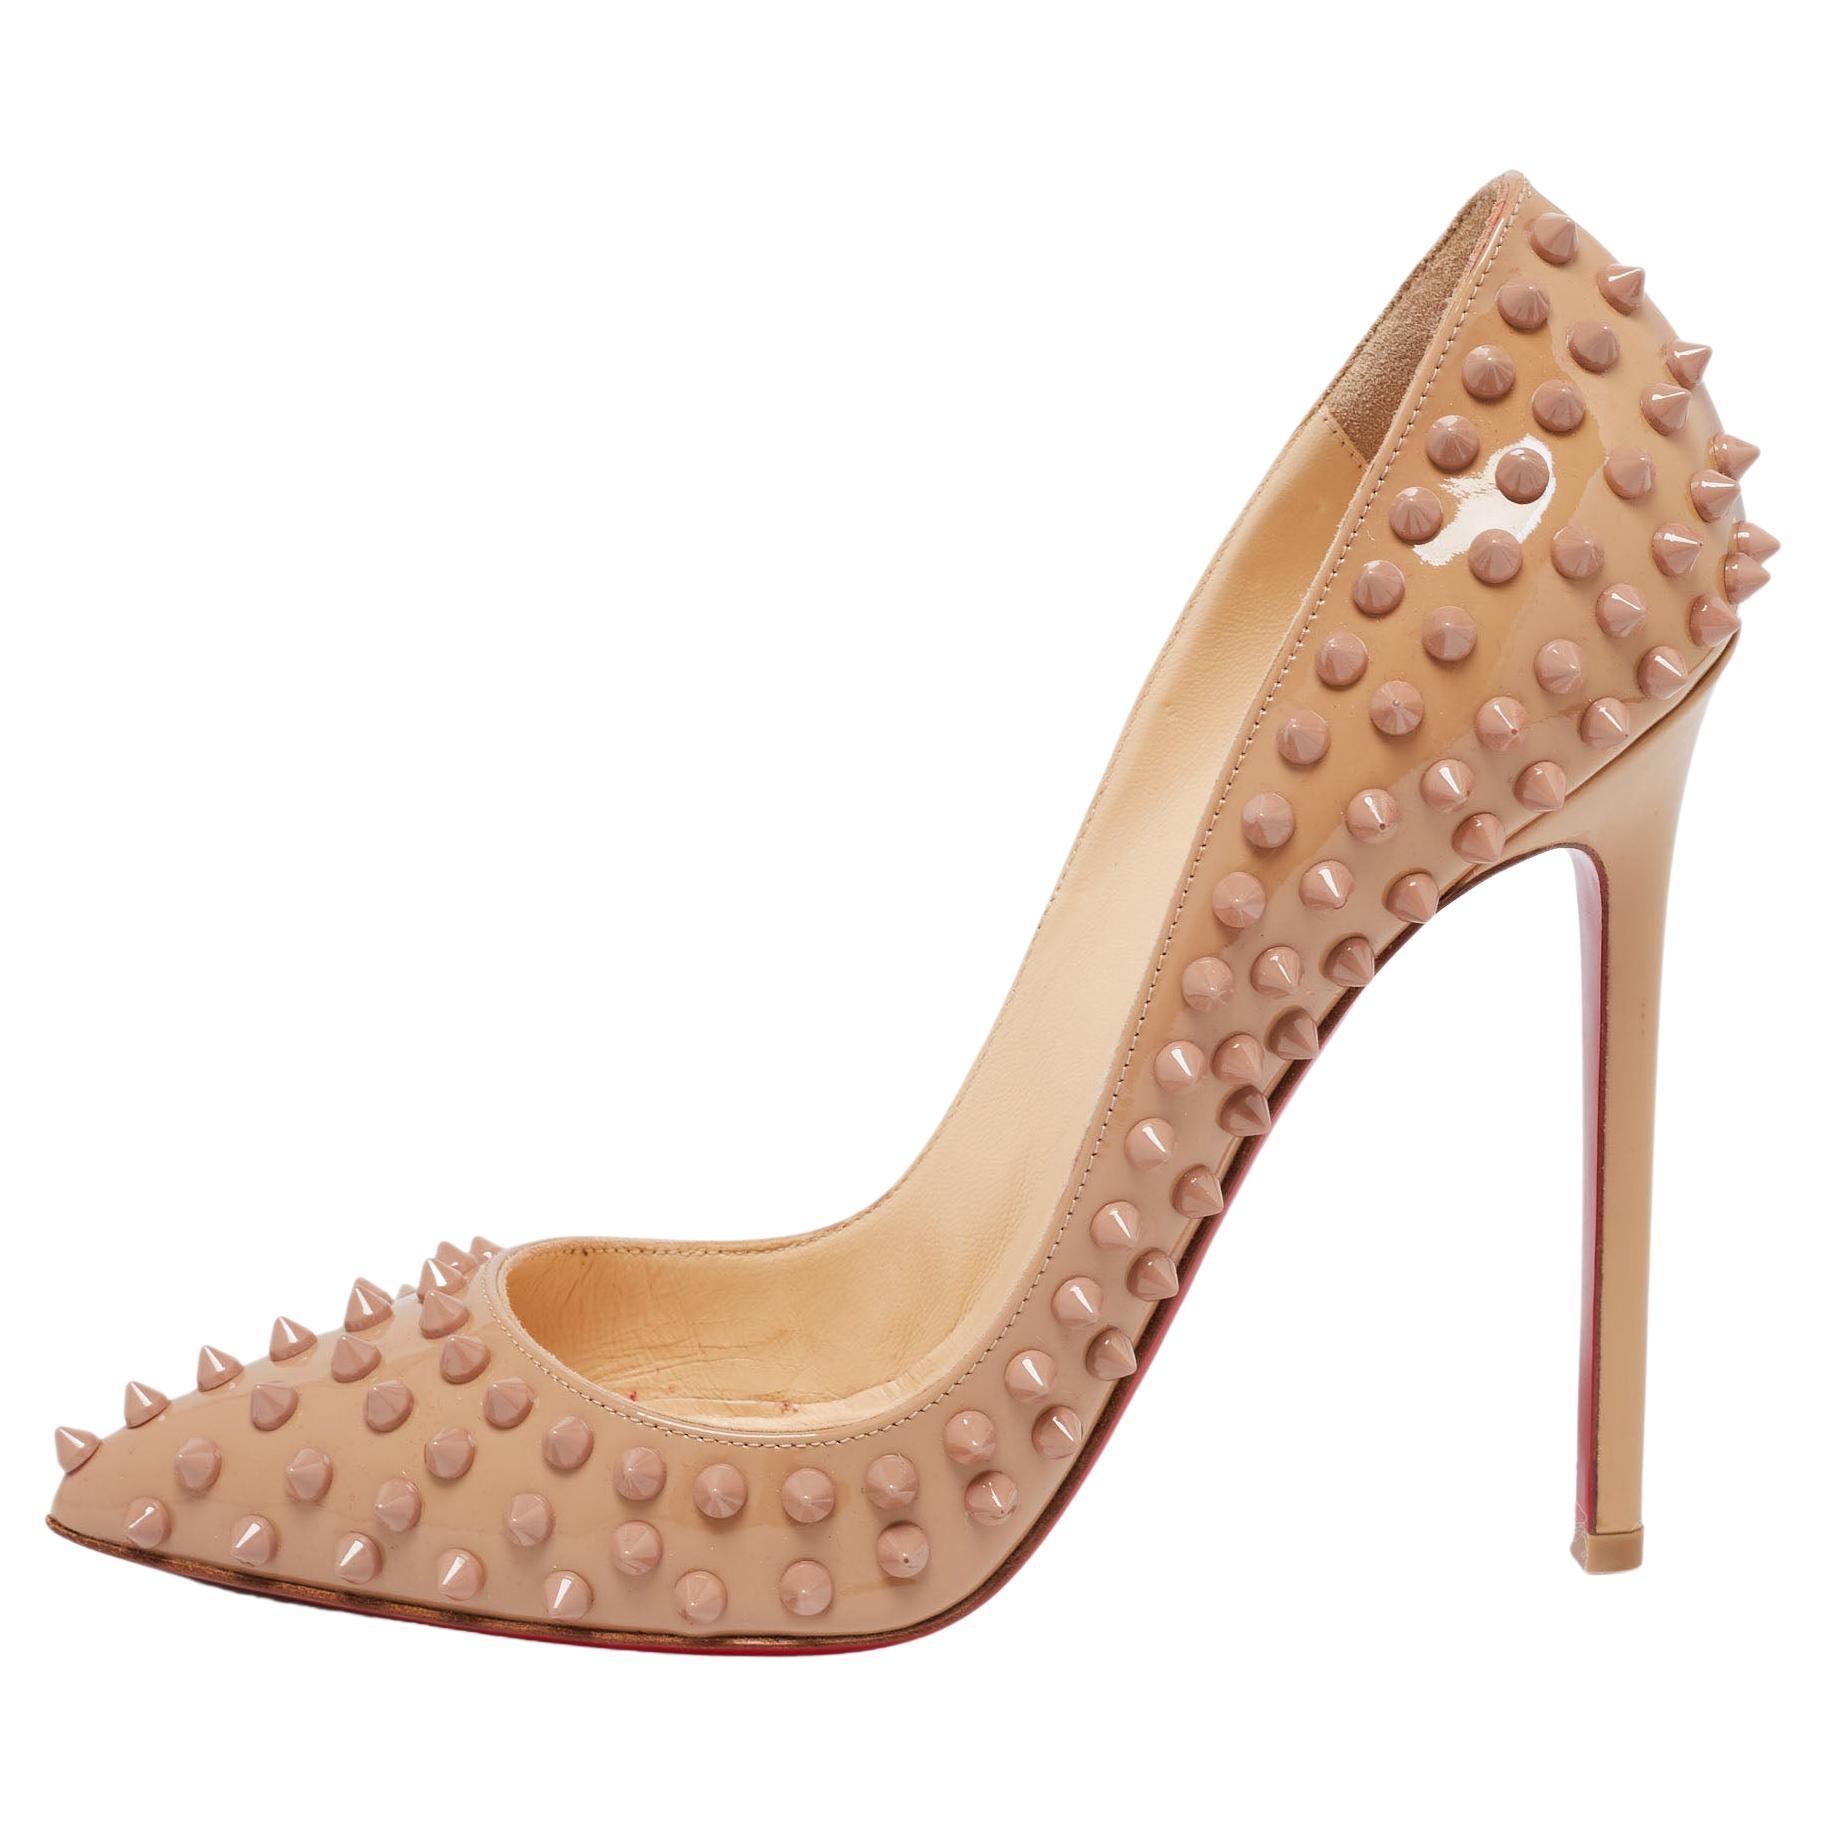 Christian Louboutin Beige Patent Leather Pigalle Spikes Pumps Size 38